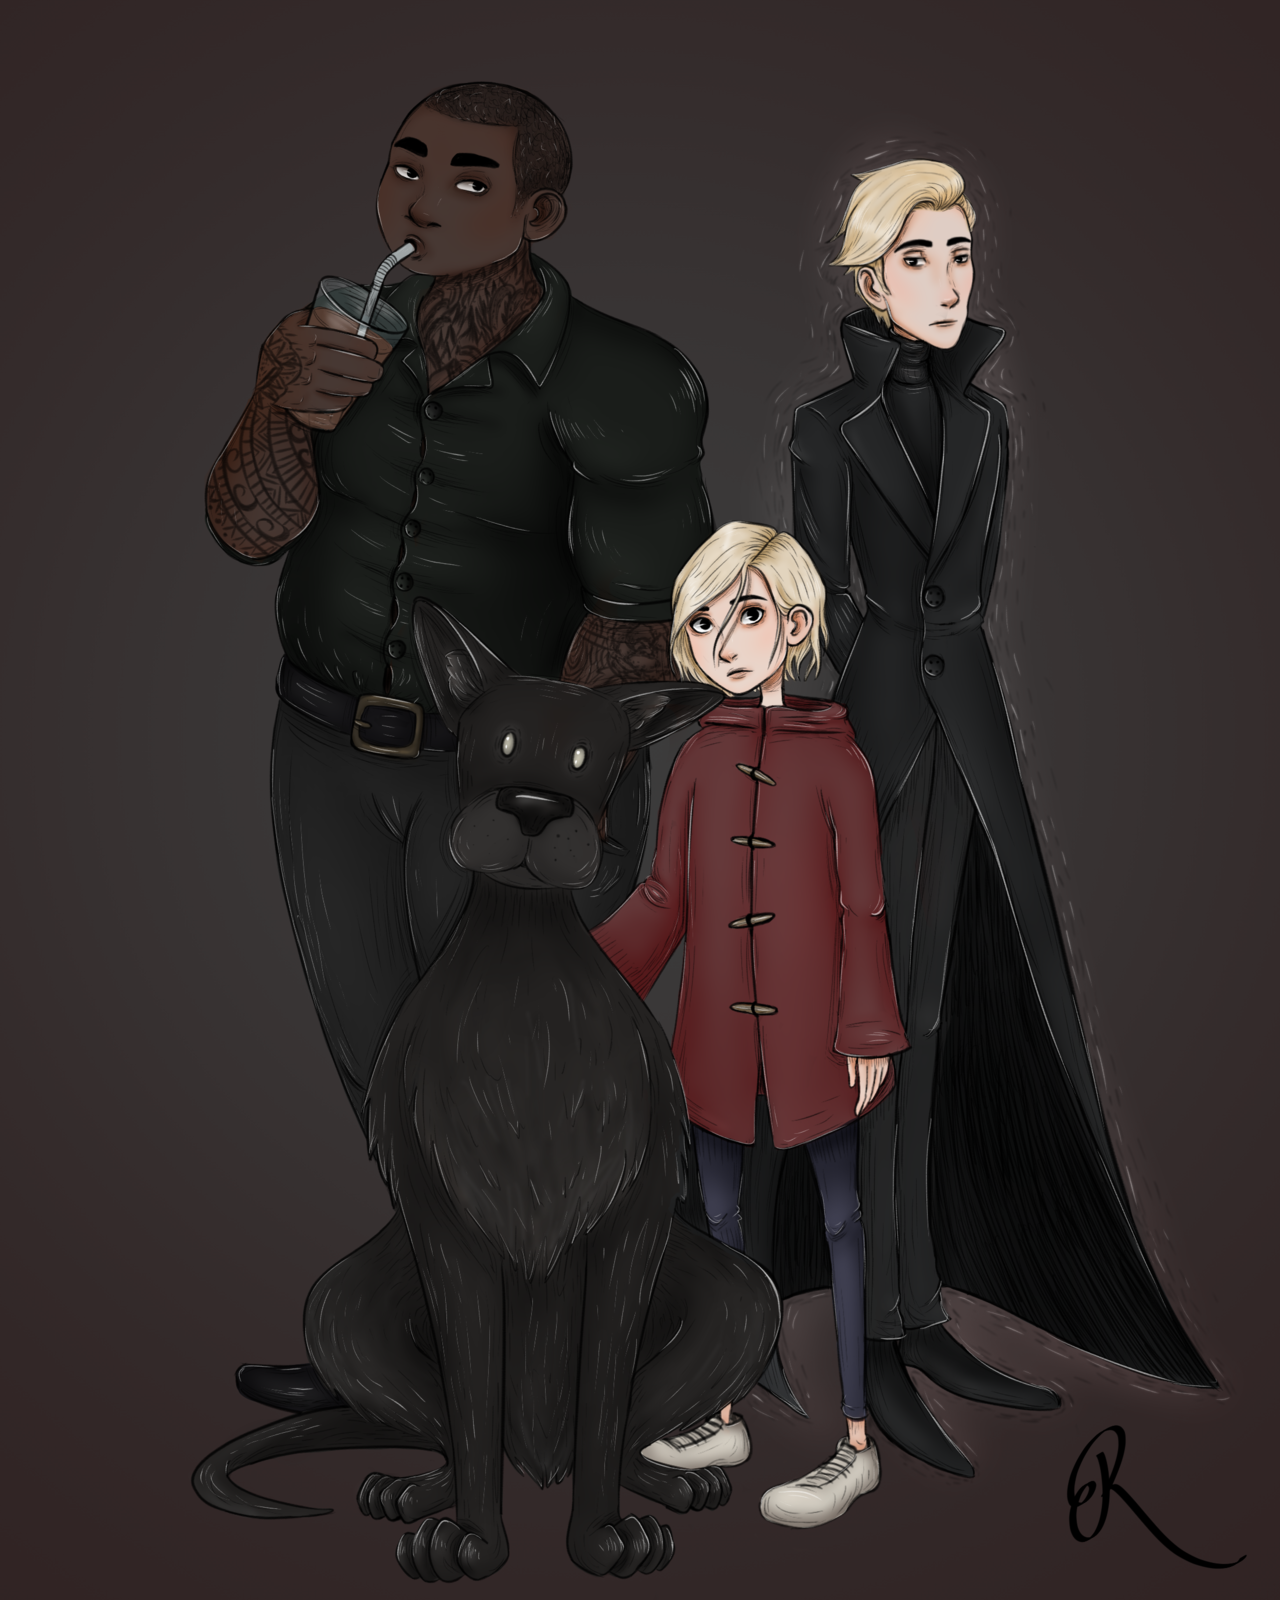 Artwork of the characters Sydney Clarke, Victor Vale, and Mitch Turner shows the trio standing together. The two men flank Sydney protectively as she stands in front of them, tiny in comparison. Sydney's large black dog, Dol. Mitch, on the left, is a tall, muscular Black man covered in tattoos and wearing all black. He casually sips chocolate milk through a straw. Victor, on the right, is slightly shorter than Mitch, extremely pale with short, blonde hair, and wearing all black. Sydney is also pale with short blonde hair. She is wearing a red coat, blue jeans, and white sneakers. 